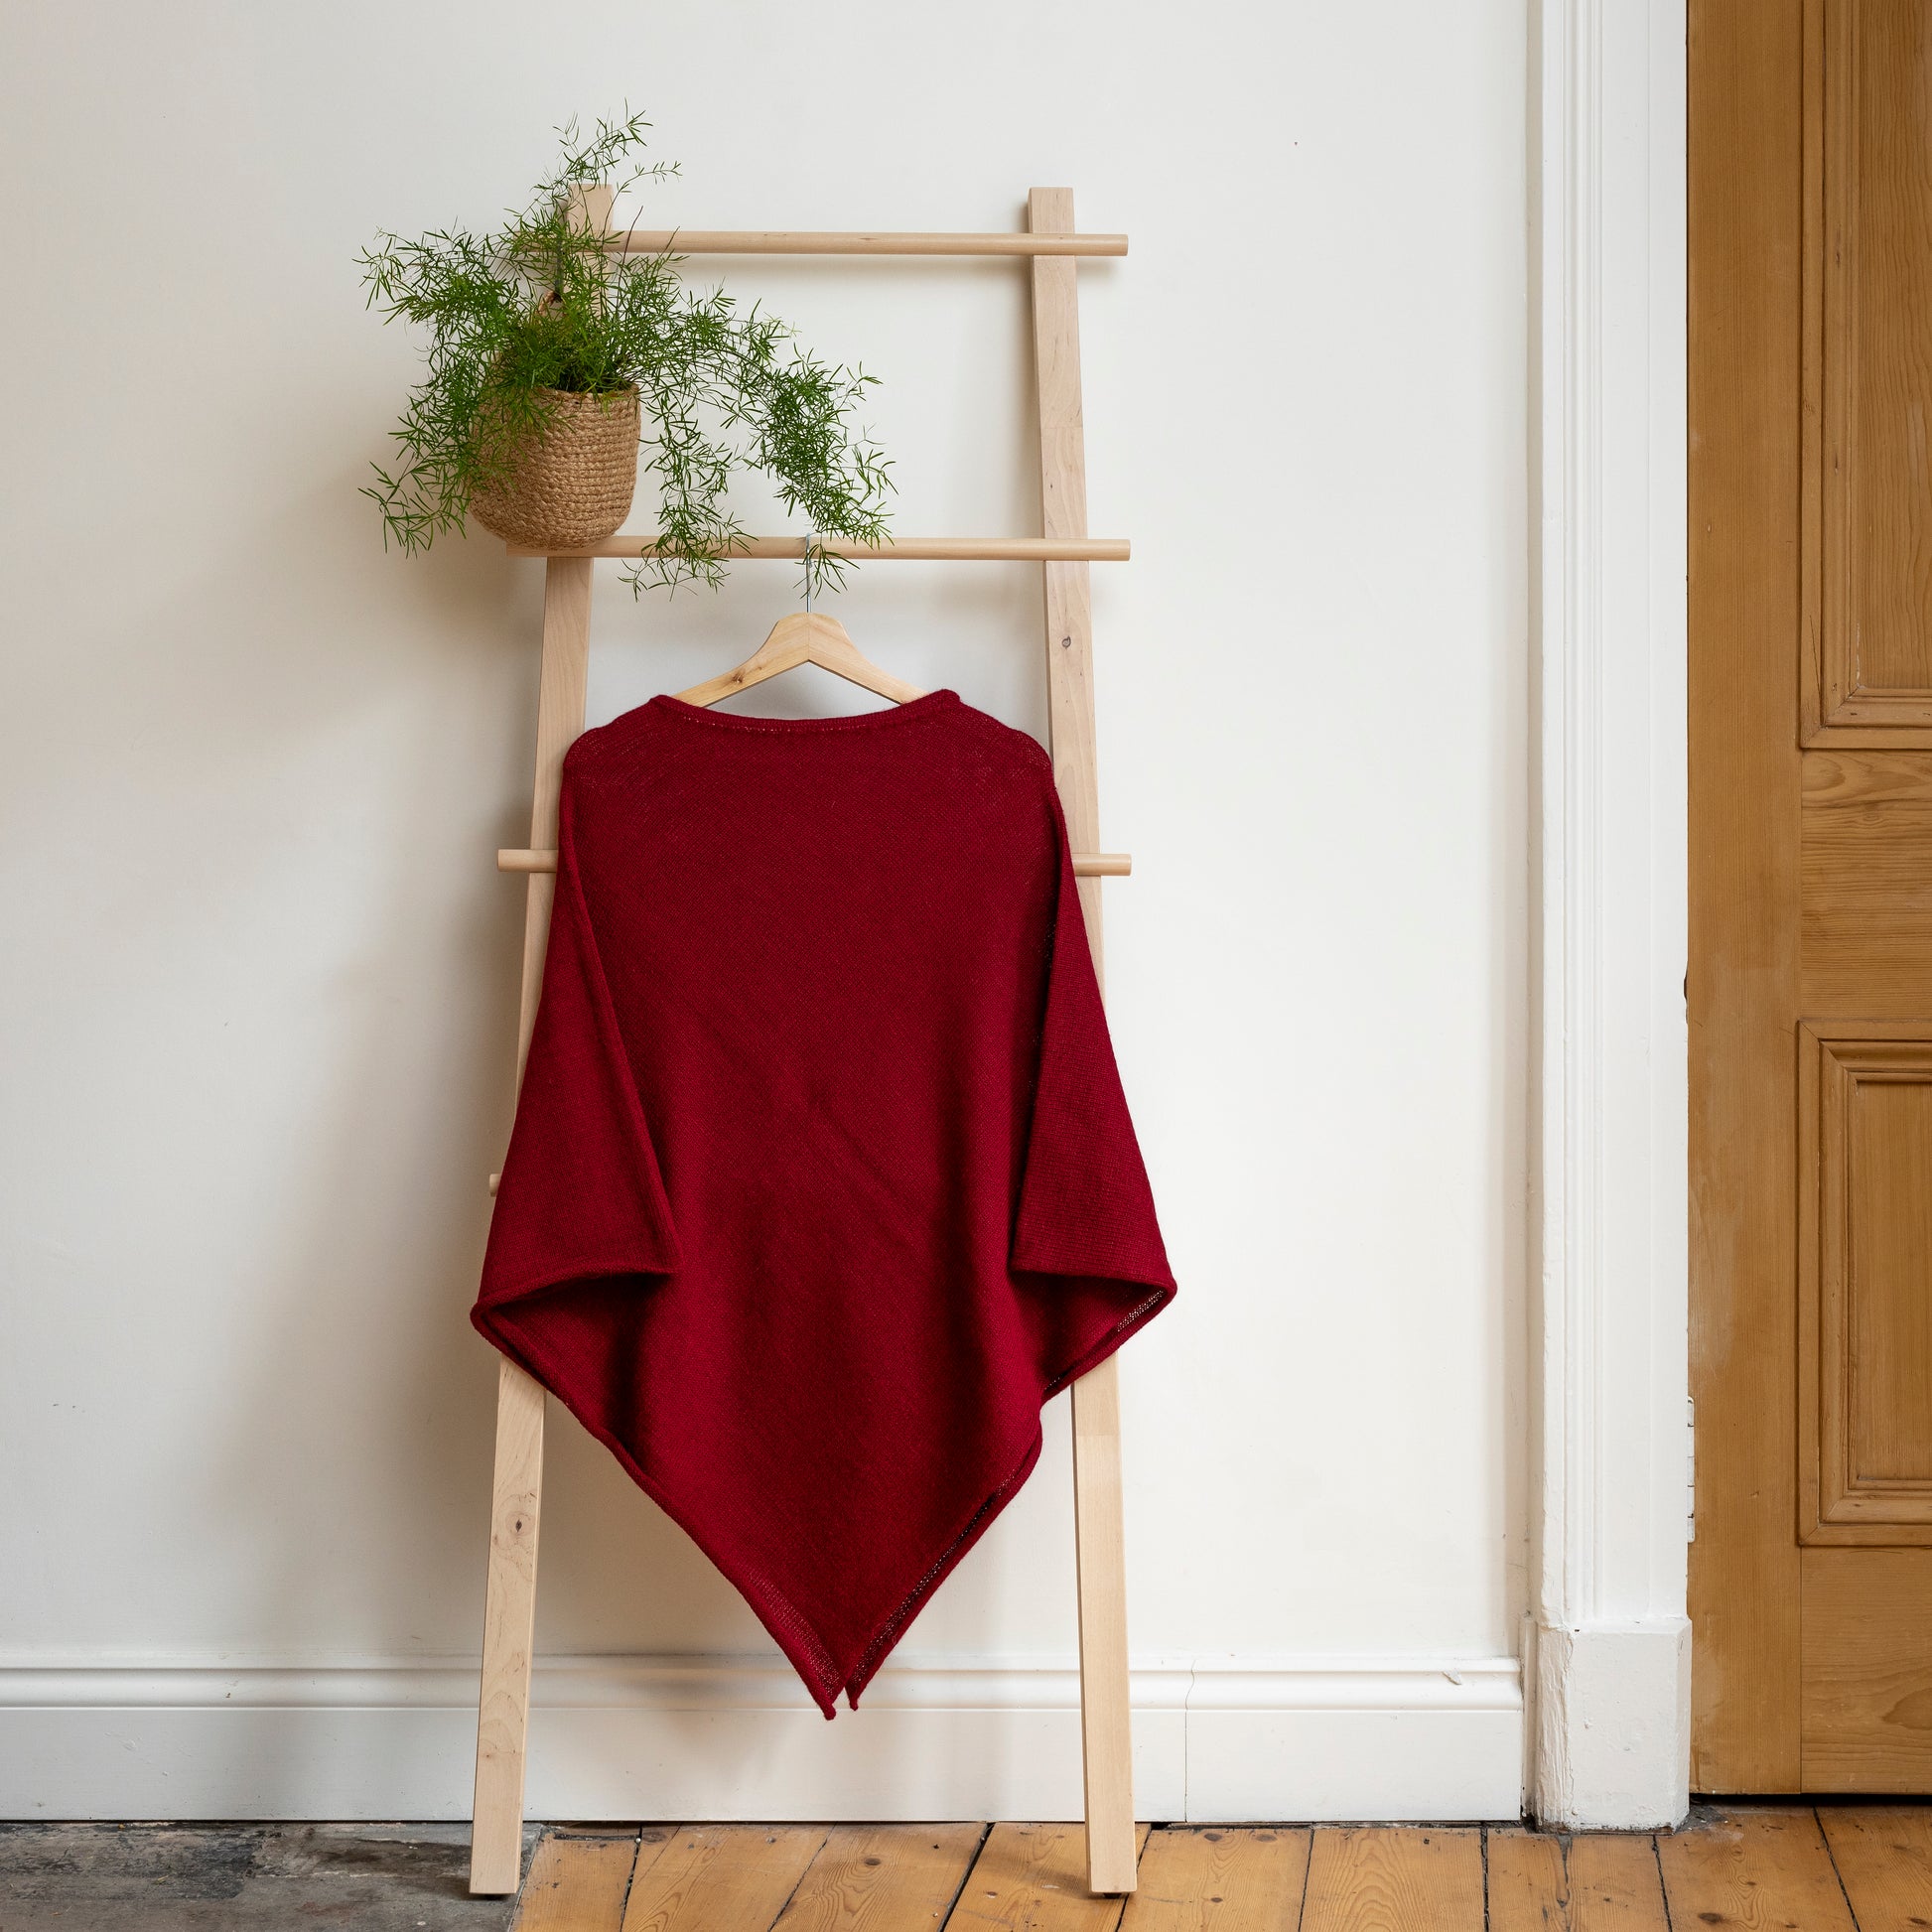 Lightweight texture and burdundy coloured, purely alpaca wool lightweight poncho hanging from wooden steps.